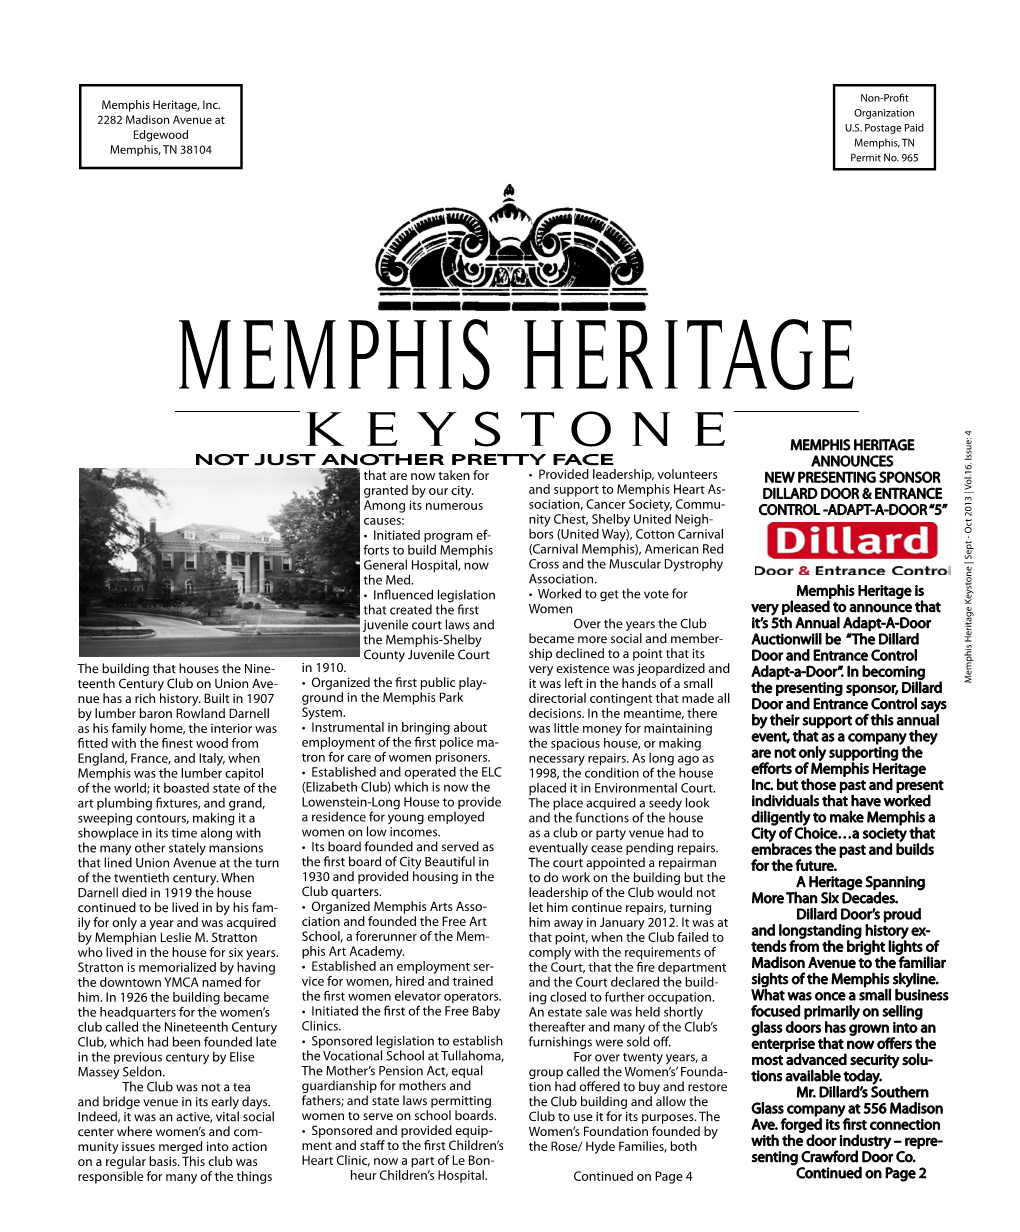 KEYSTONE MEMPHIS HERITAGE NOT JUST ANOTHER PRETTY FACE ANNOUNCES That Are Now Taken for • Provided Leadership, Volunteers NEW PRESENTING SPONSOR Granted by Our City